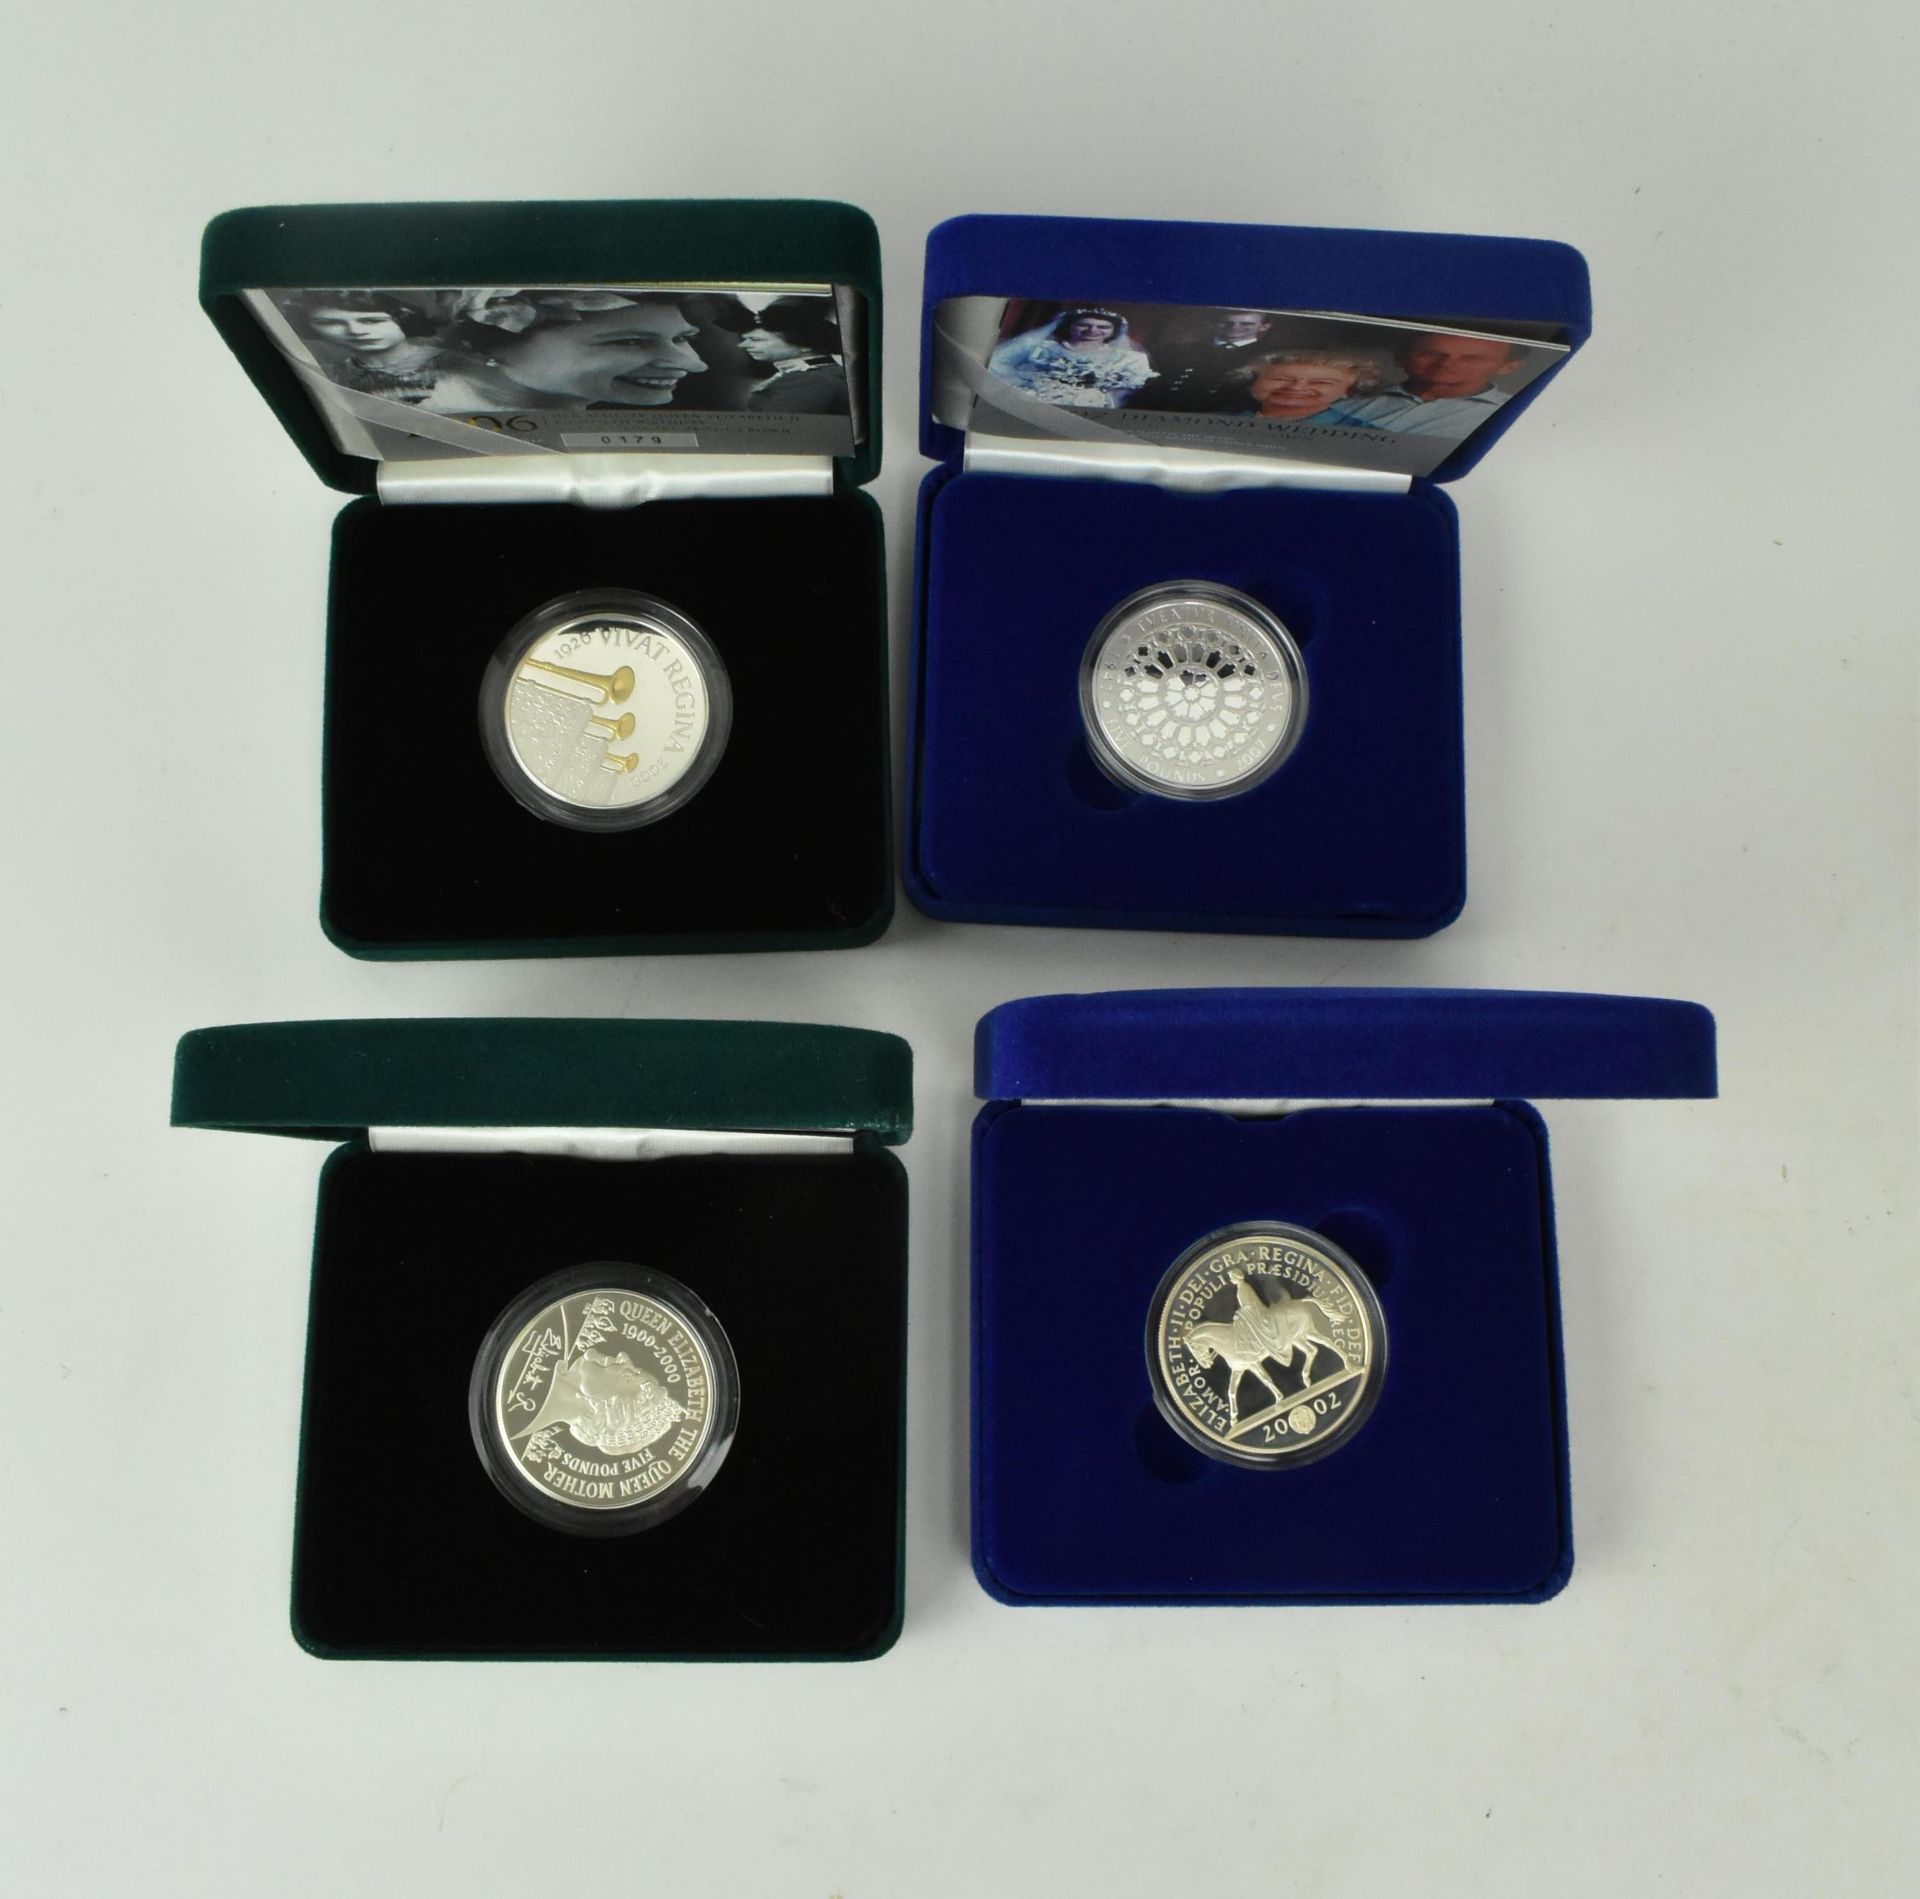 ROYAL MINT - COLLECTION OF SILVER COMMEMORATIVE COINS - Image 4 of 8